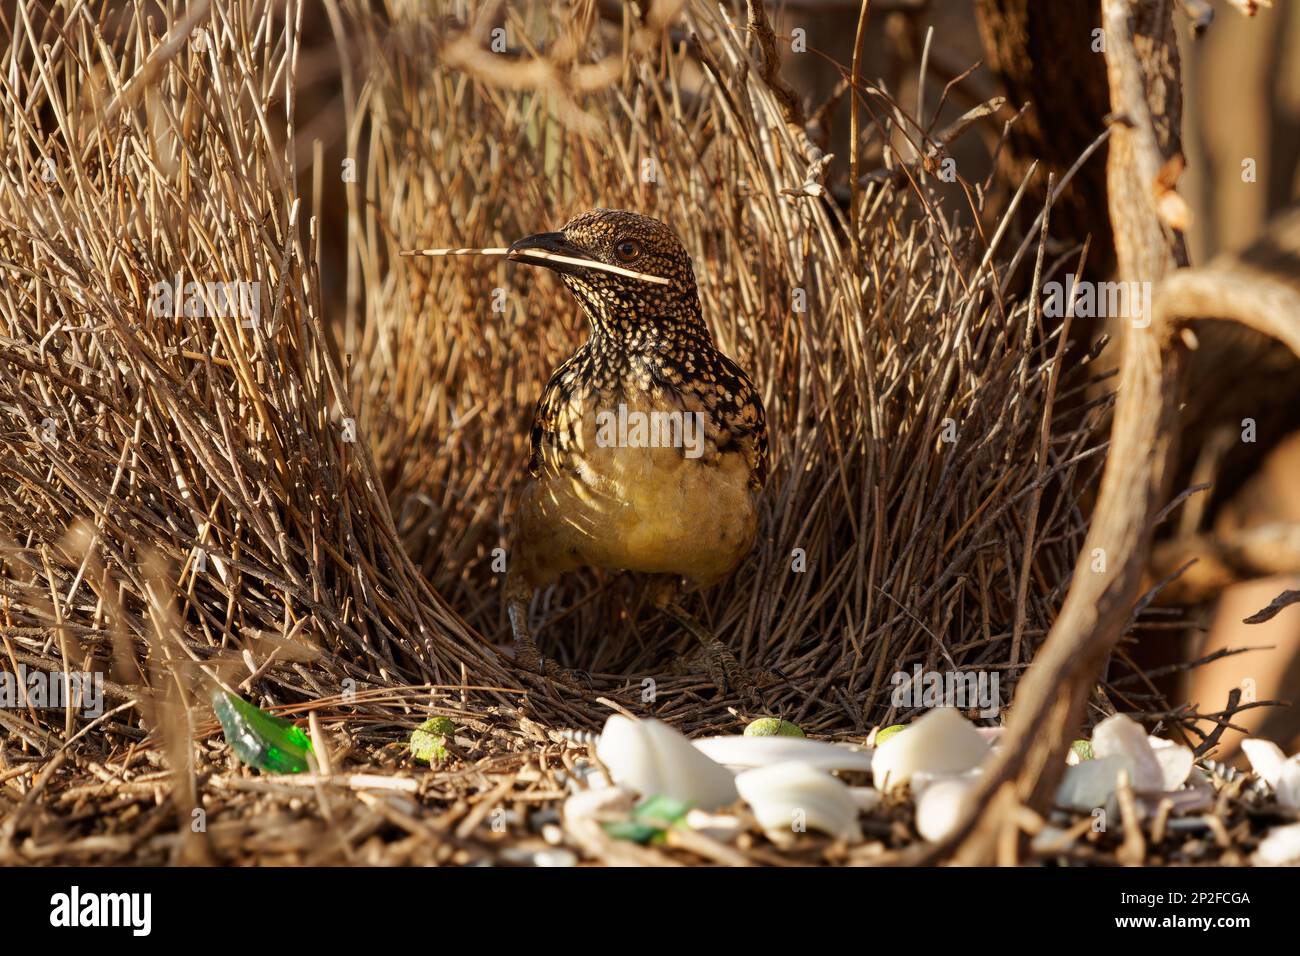 Western Bowerbird - Chlamydera guttata  endemic bird of Australia in Ptilonorhynchidae, brown with spots with a pink erectile crest on the nape, male Stock Photo